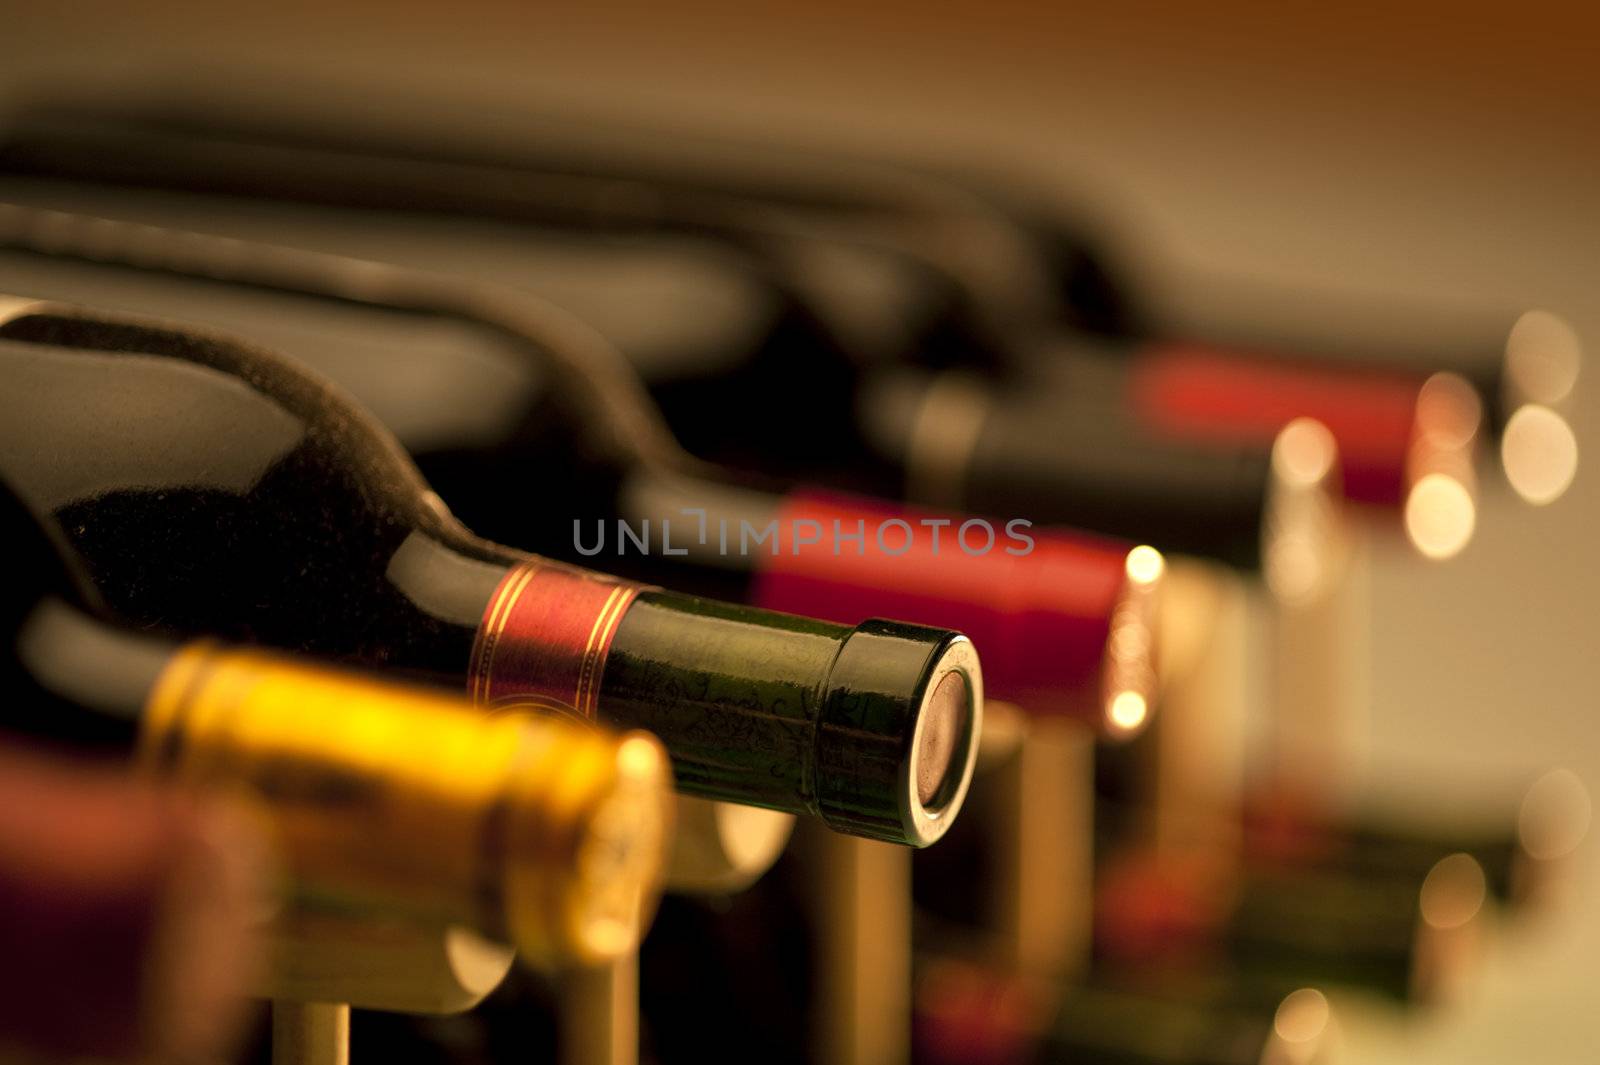 Wine bottles photographed with very little depth of field